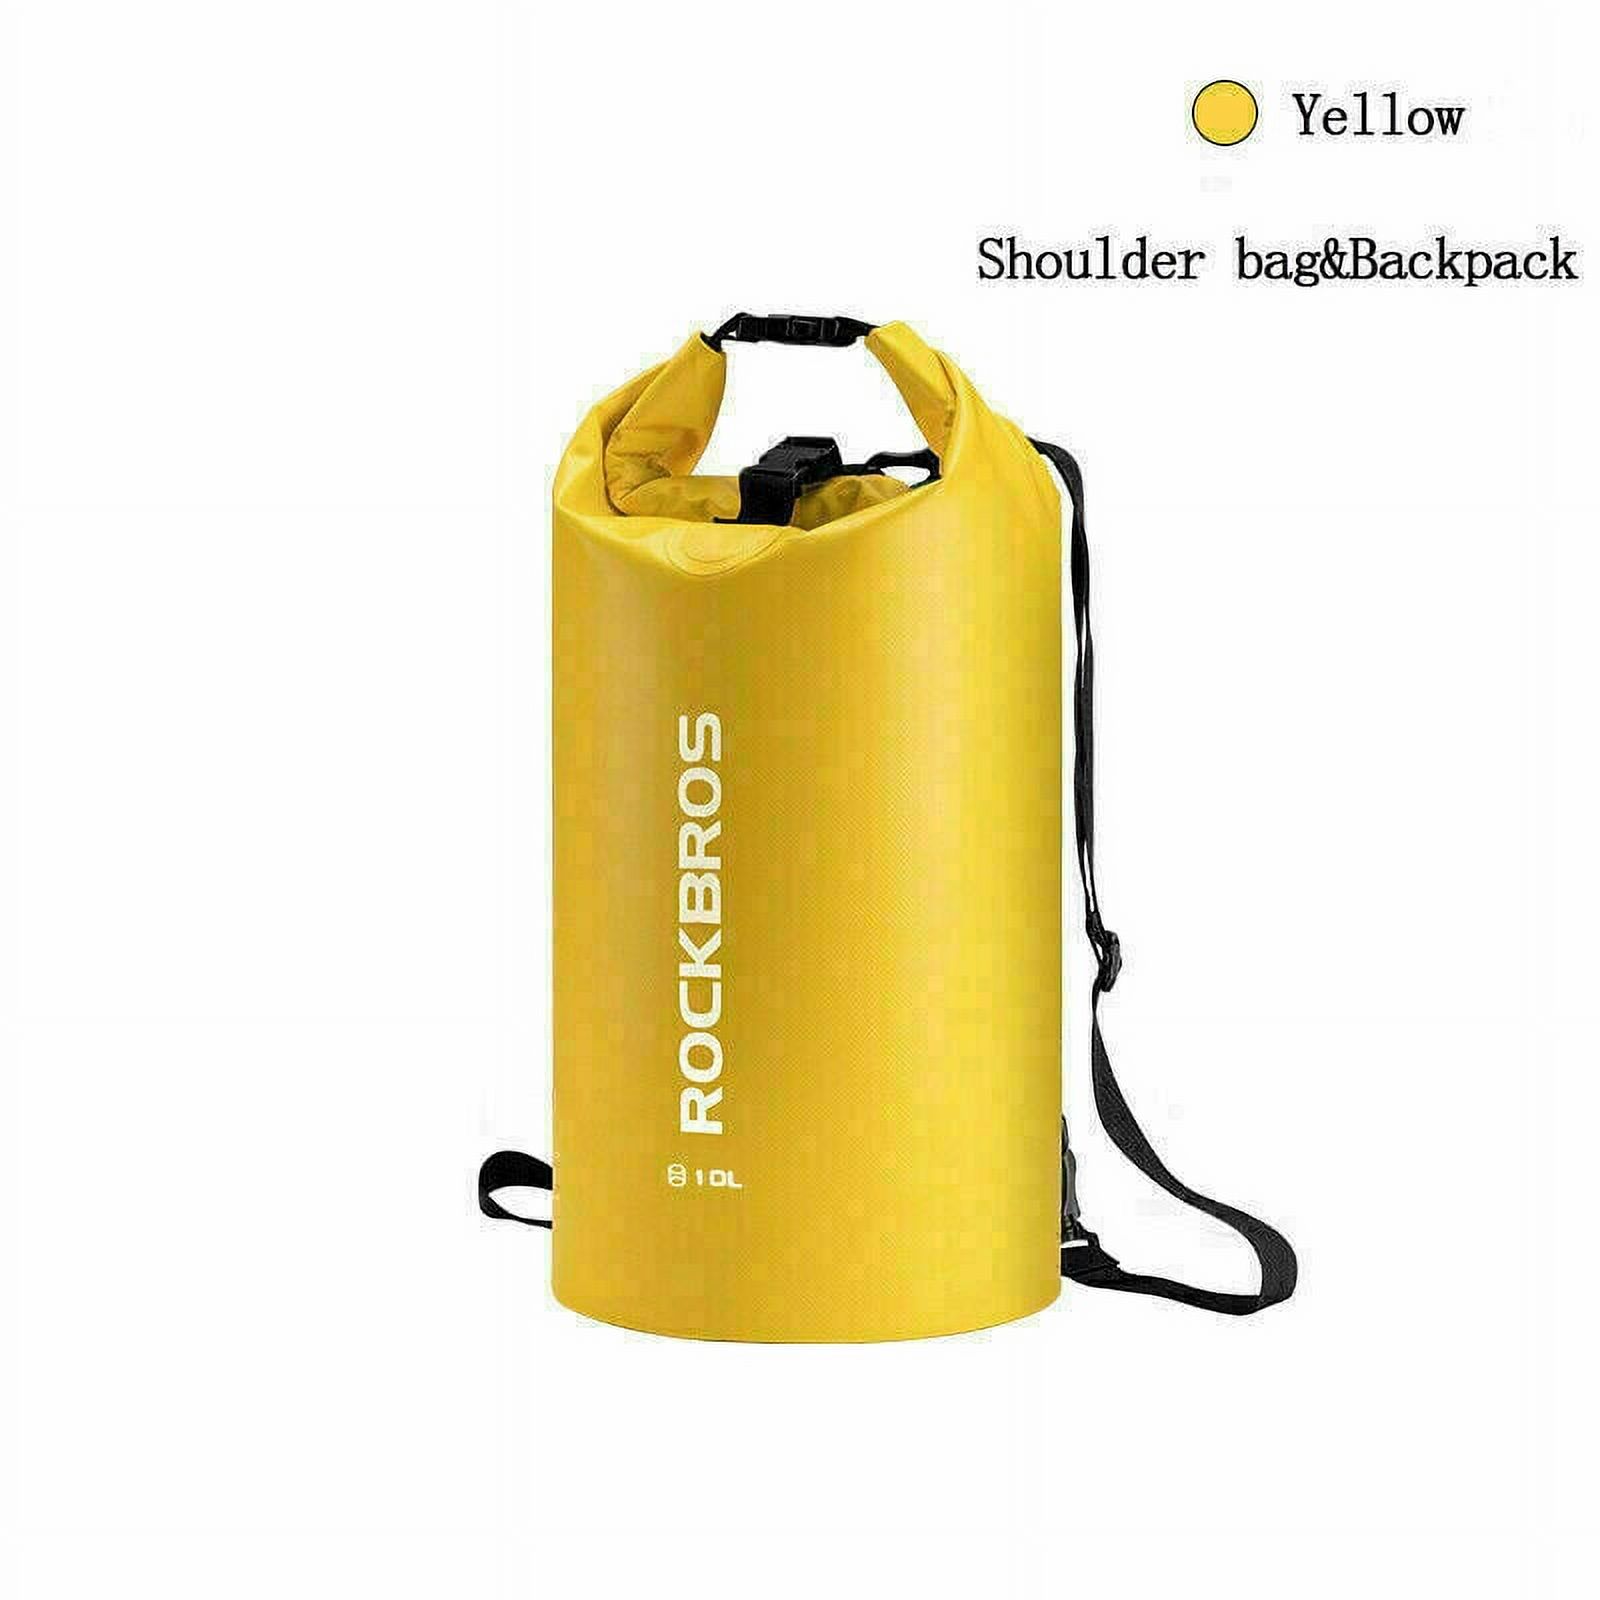 ROCKBROS 10L Valuables Watertight Dry Bags,Sacks Water Sport Bag, Weather Resistant Dry Bag Roll Top, Unisex, Yellow - image 1 of 11